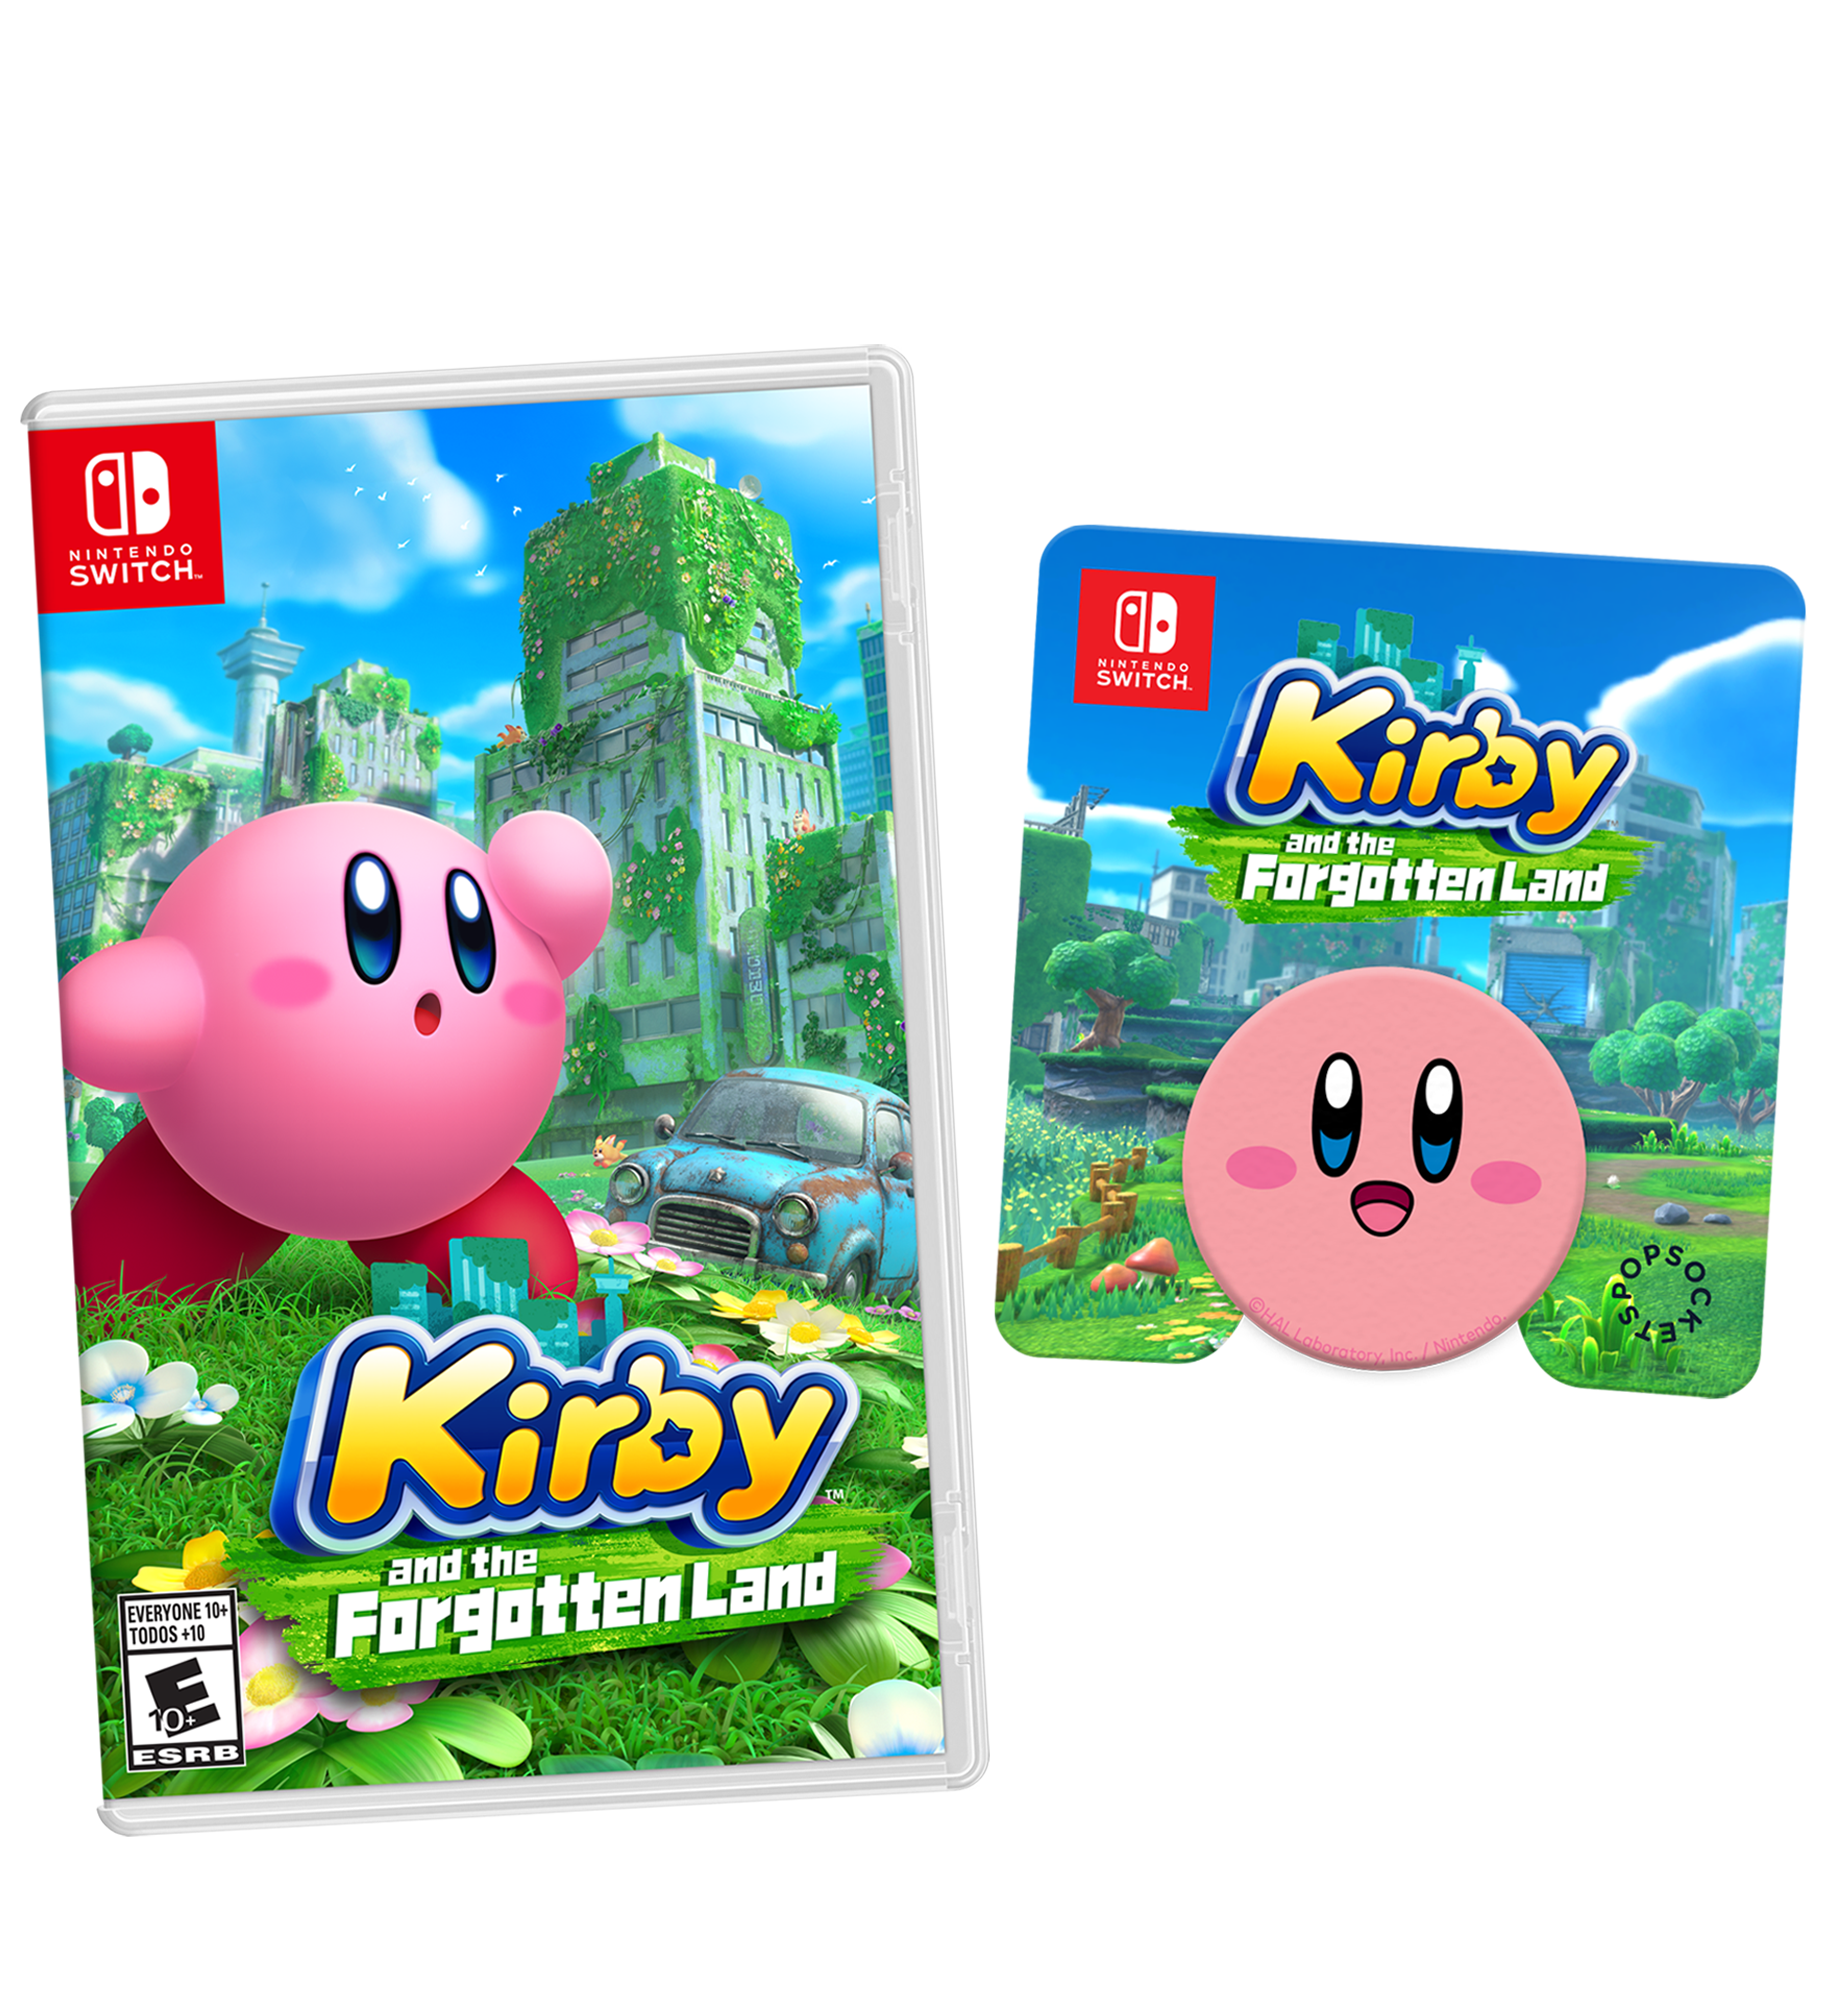 Kirby and the Forgotten Land with Pre-Order Bonus Kirby Popsocket - Nintendo Switch - image 1 of 13